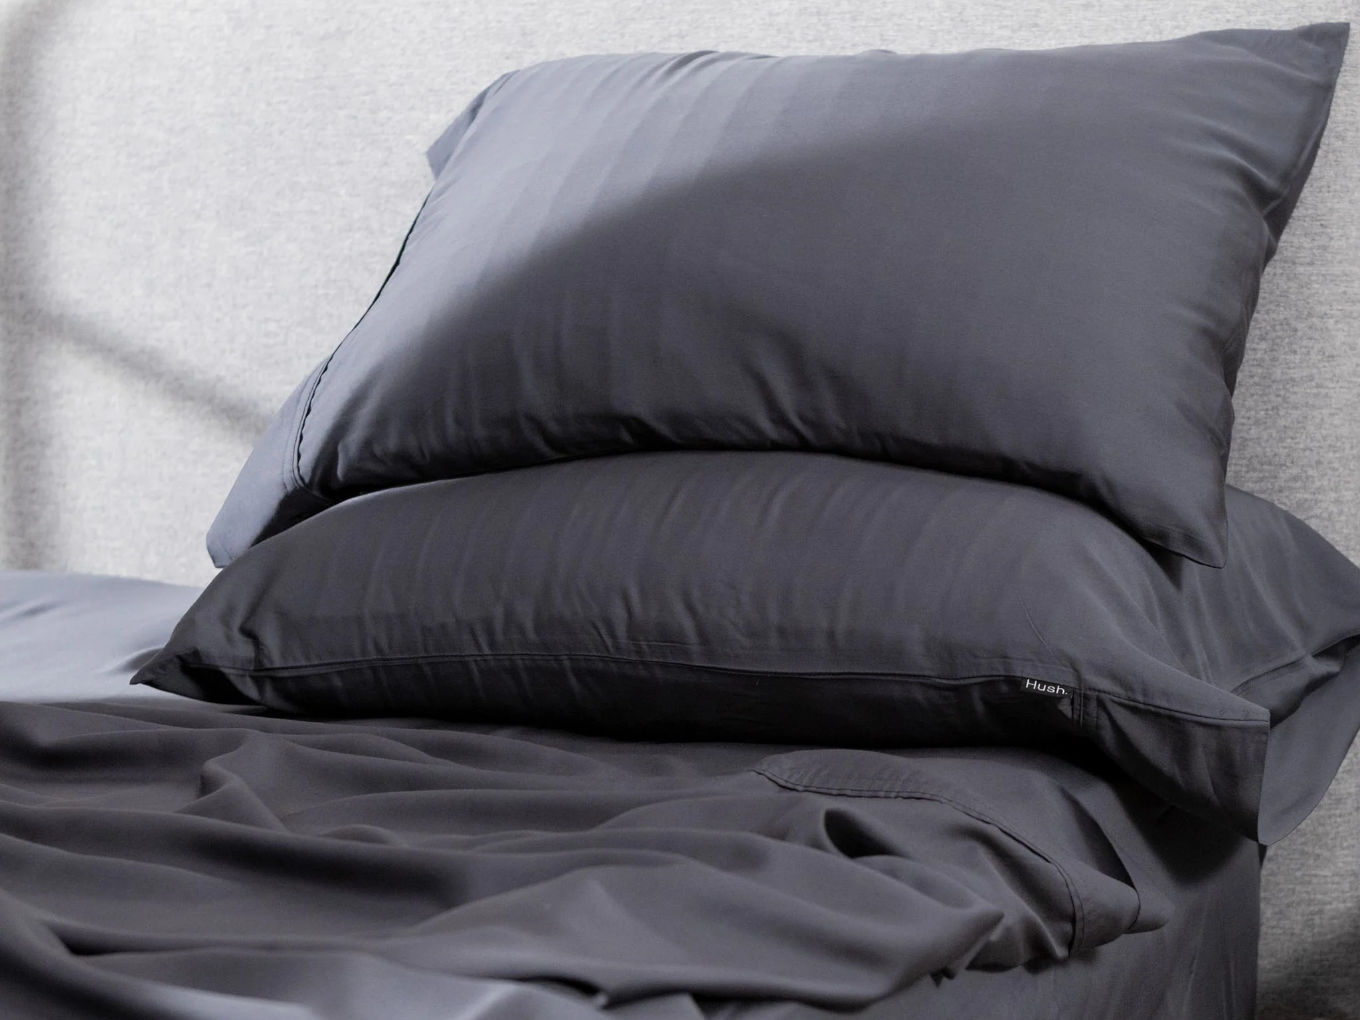 Charcoal gray Hush sheets and pillows on bed